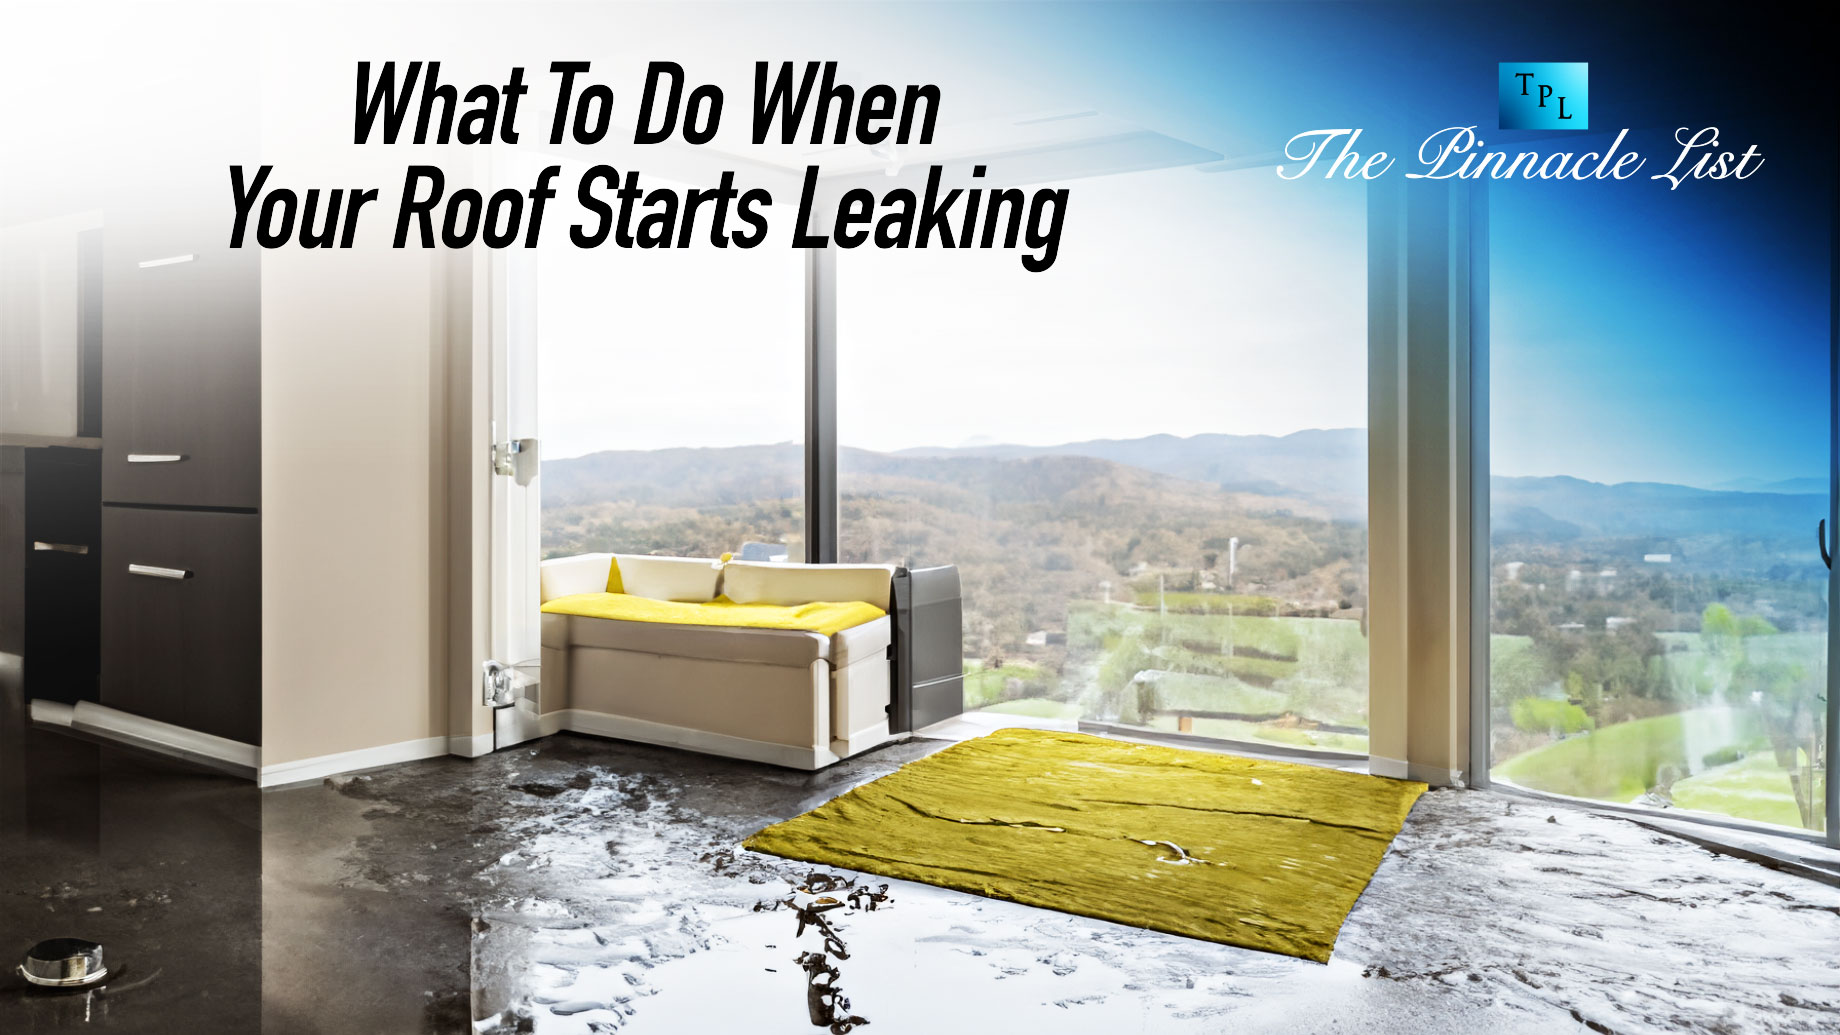 What To Do When Your Roof Starts Leaking